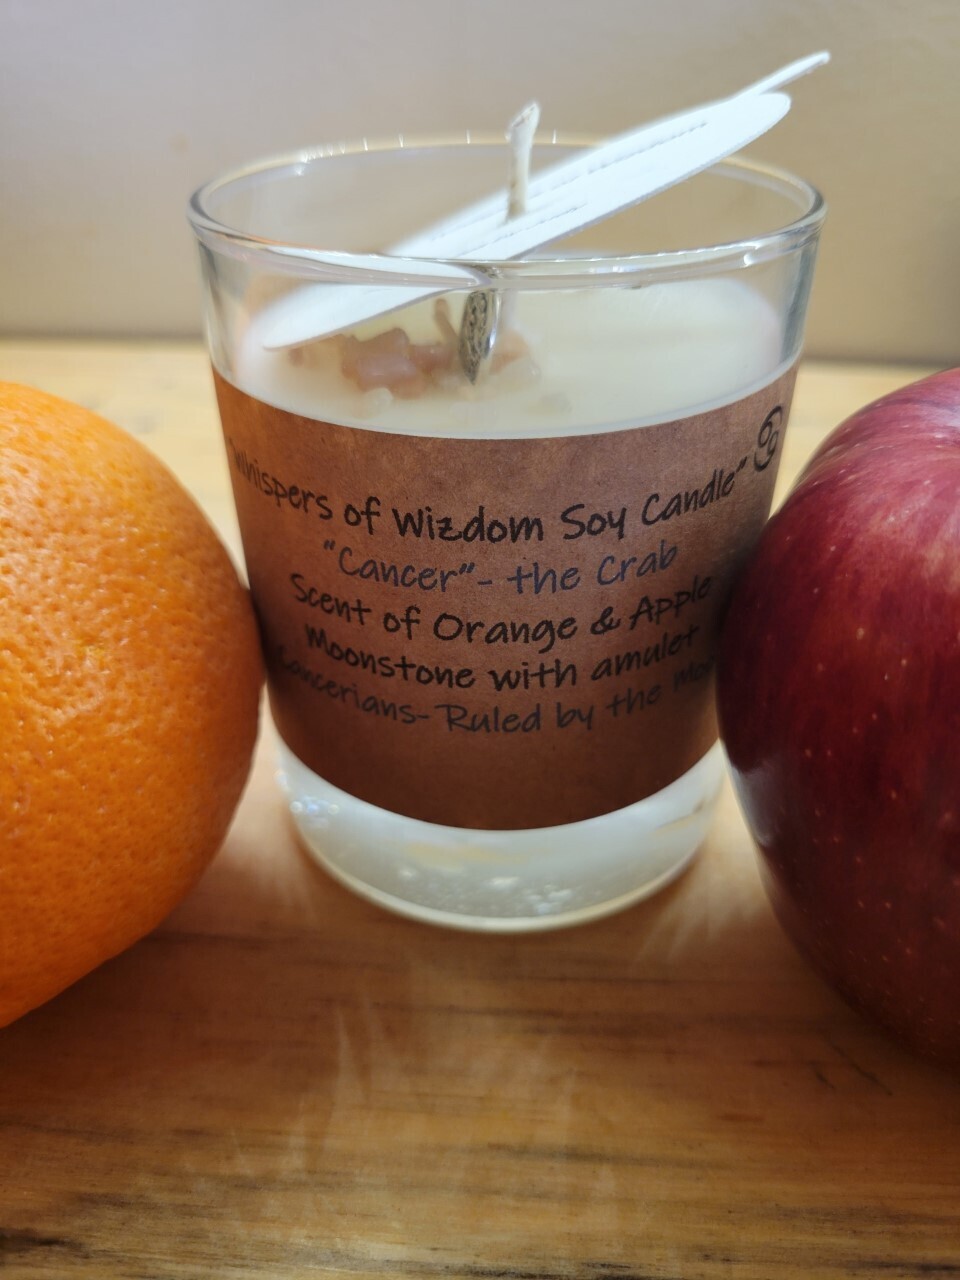 Judy's Soy Candle -Zodiac Cancer - Apple & Orange Scented